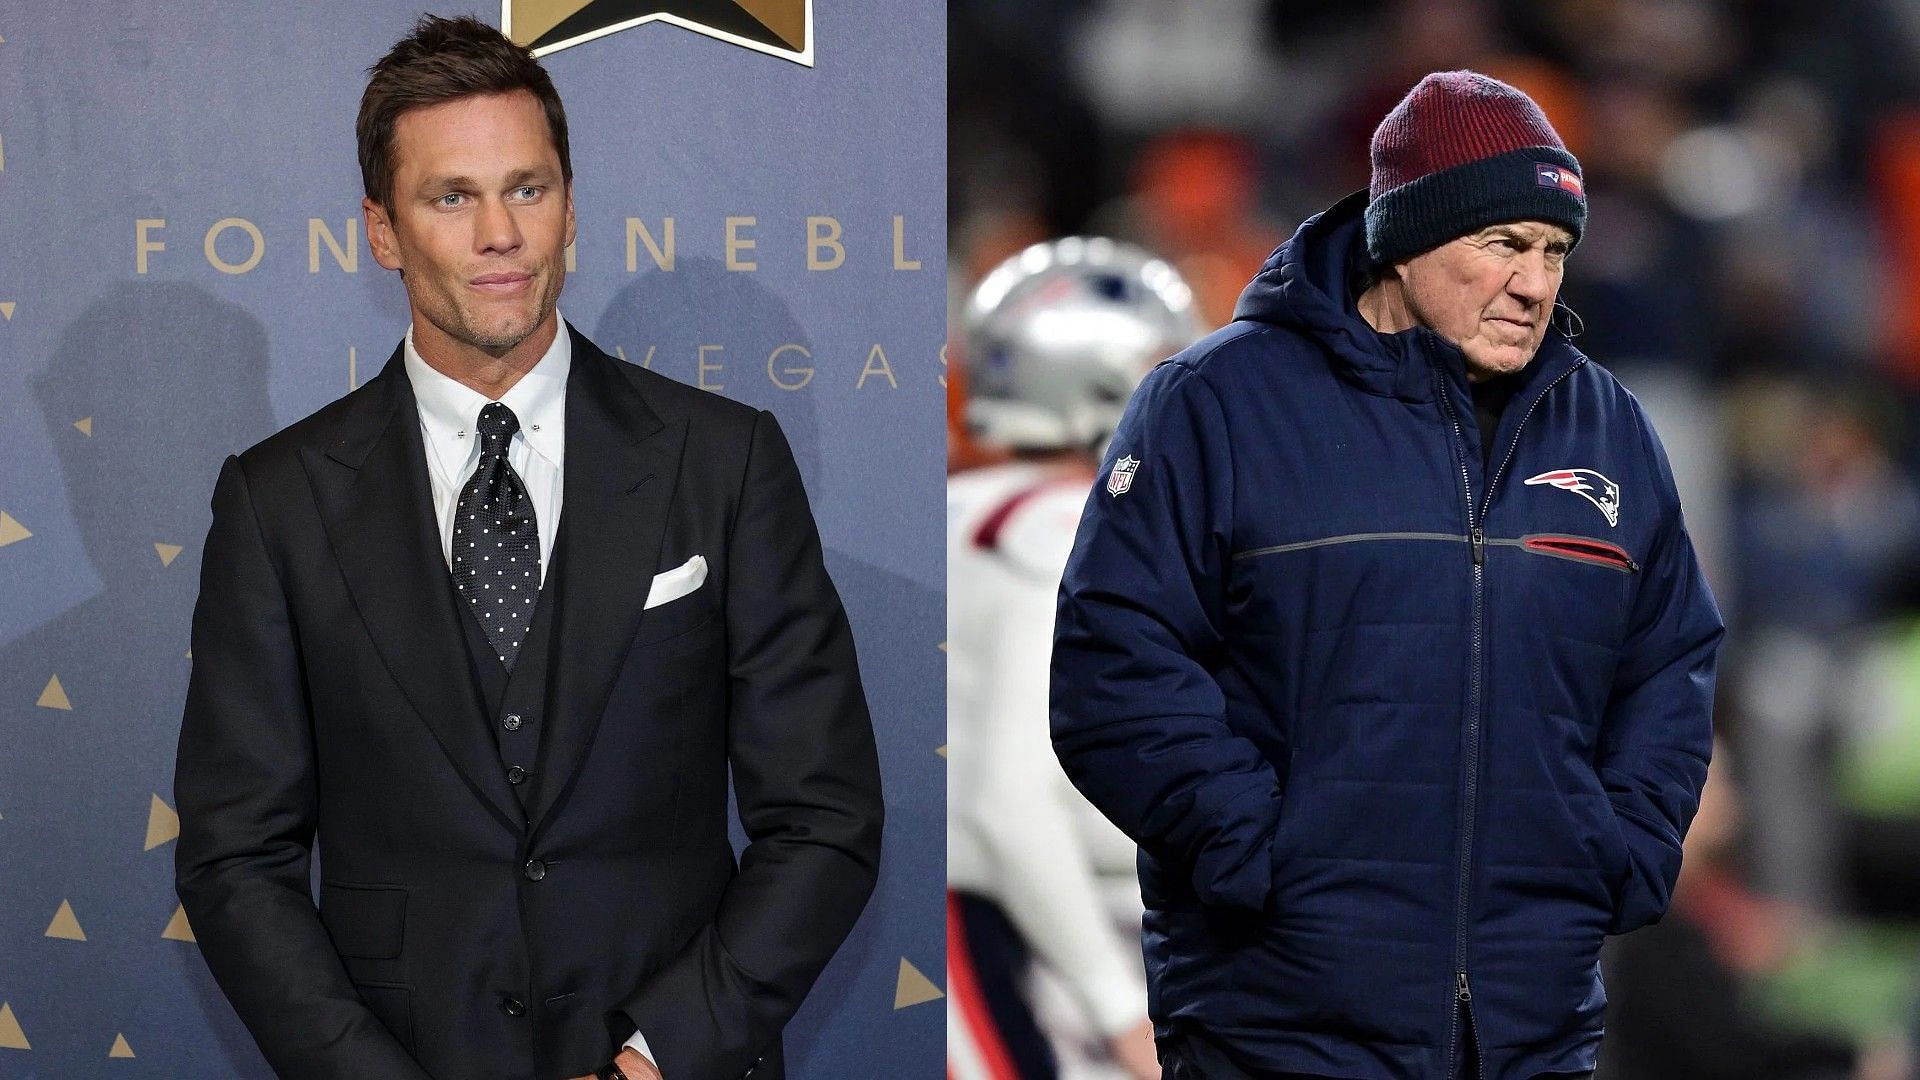 Patriots star who won first Super Bowl with Tom Brady uses wet towel to describe Bill Belichick